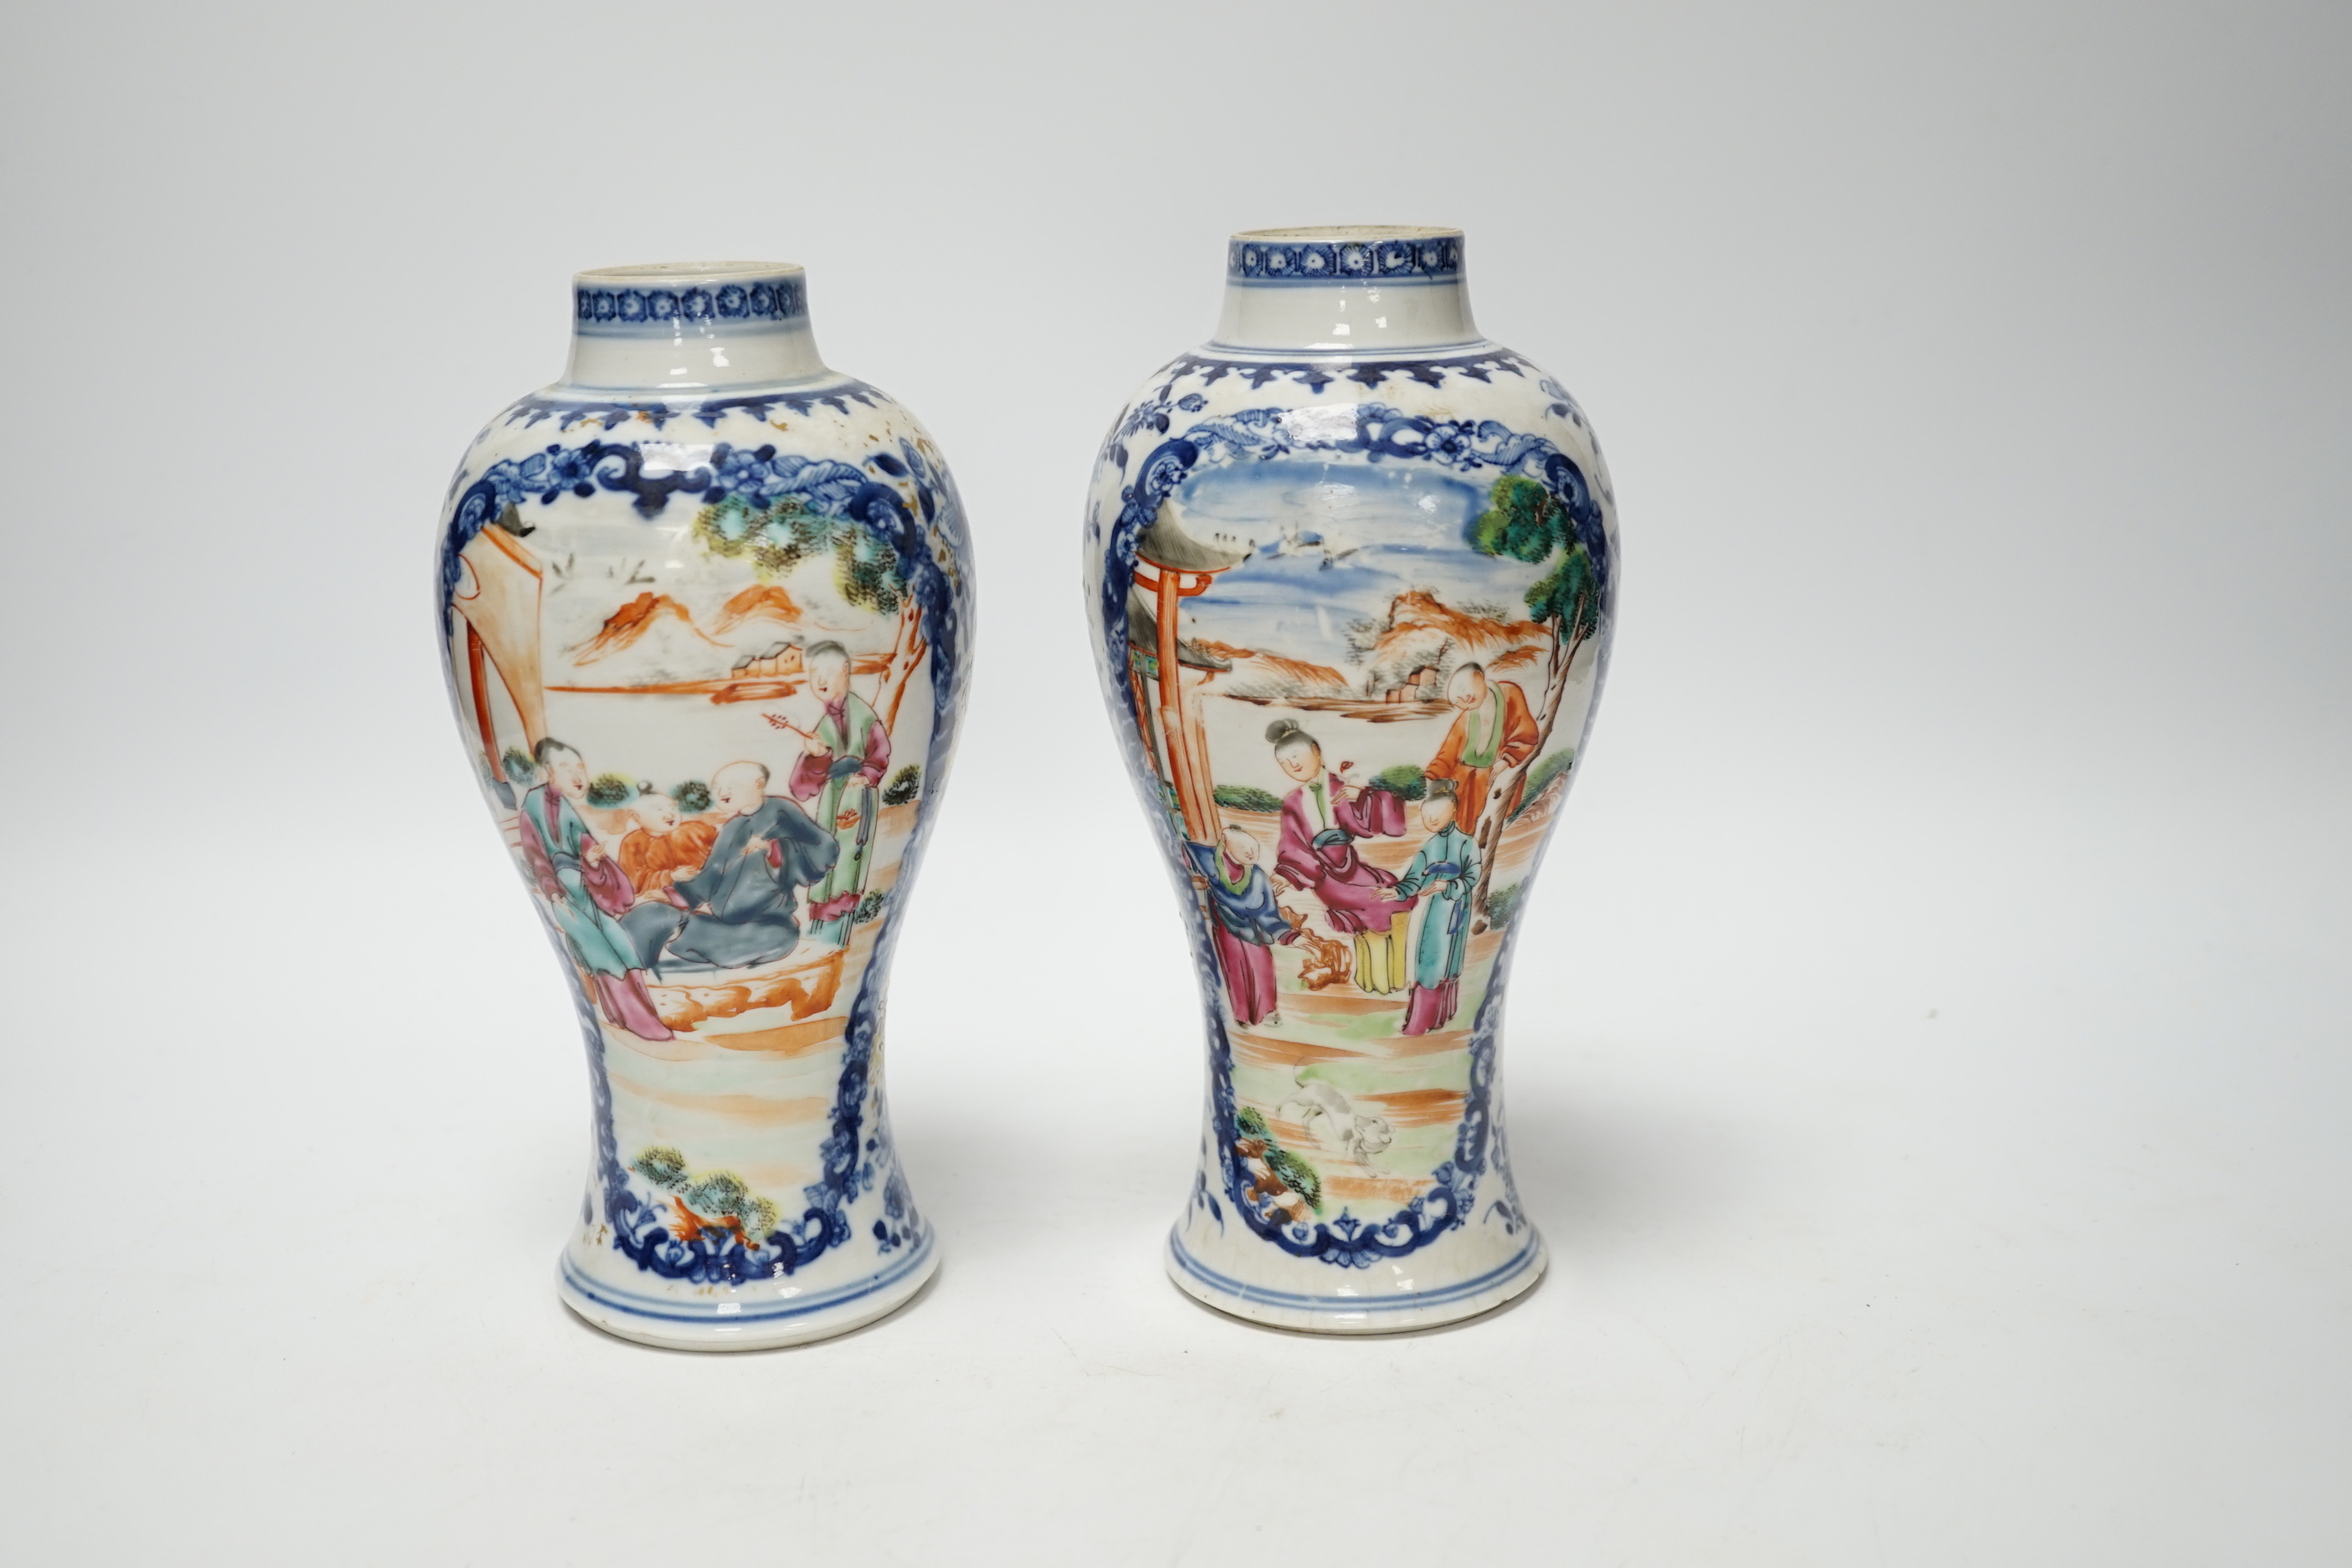 A pair of late 18th century Chinese famille rose ‘mandarin’ vases, 19cm high